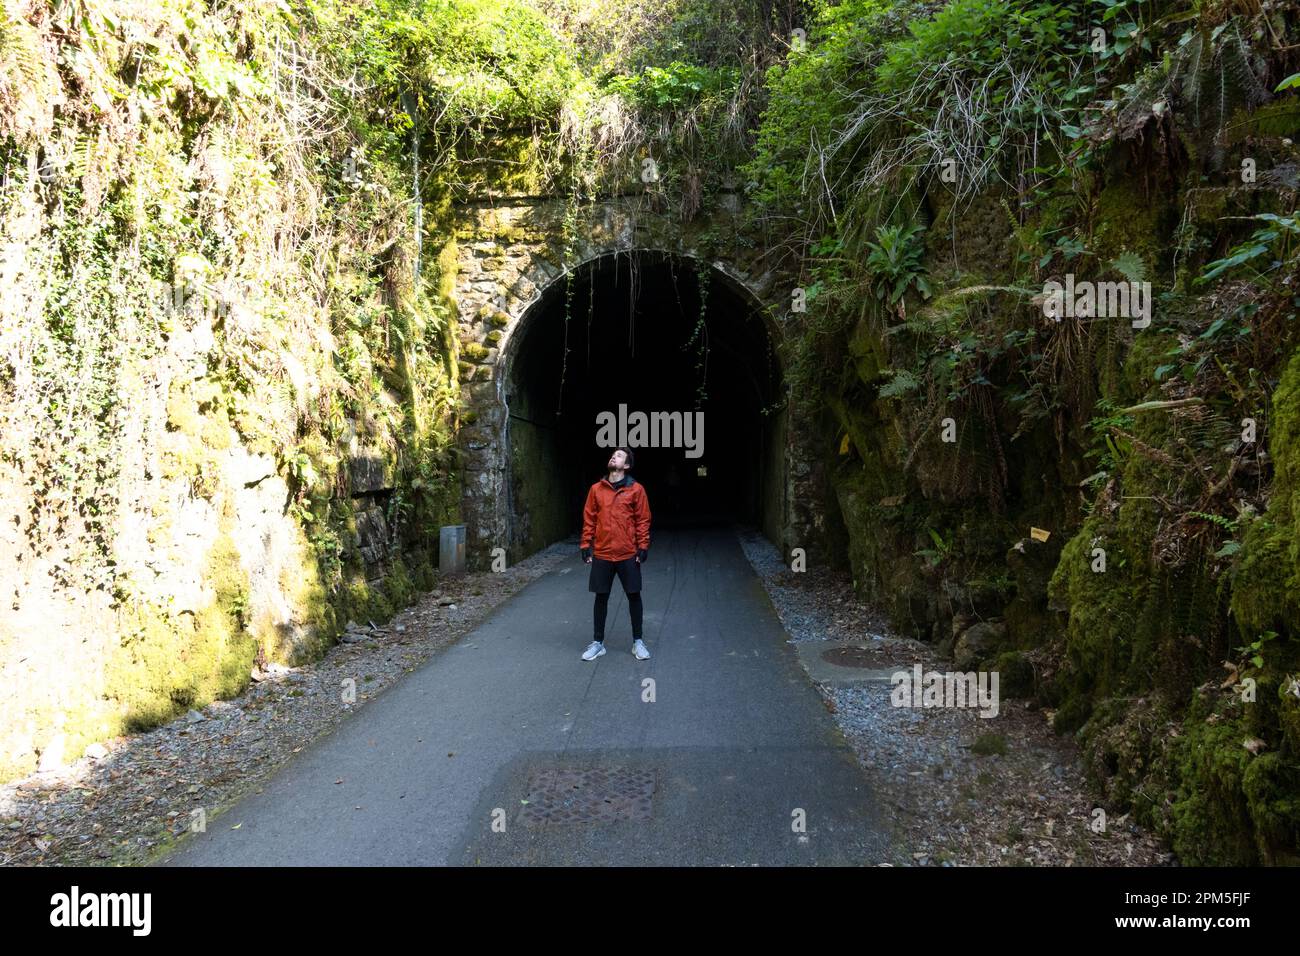 https://c8.alamy.com/comp/2PM5FJF/man-standing-in-front-of-a-mountain-tunnel-on-the-road-2PM5FJF.jpg